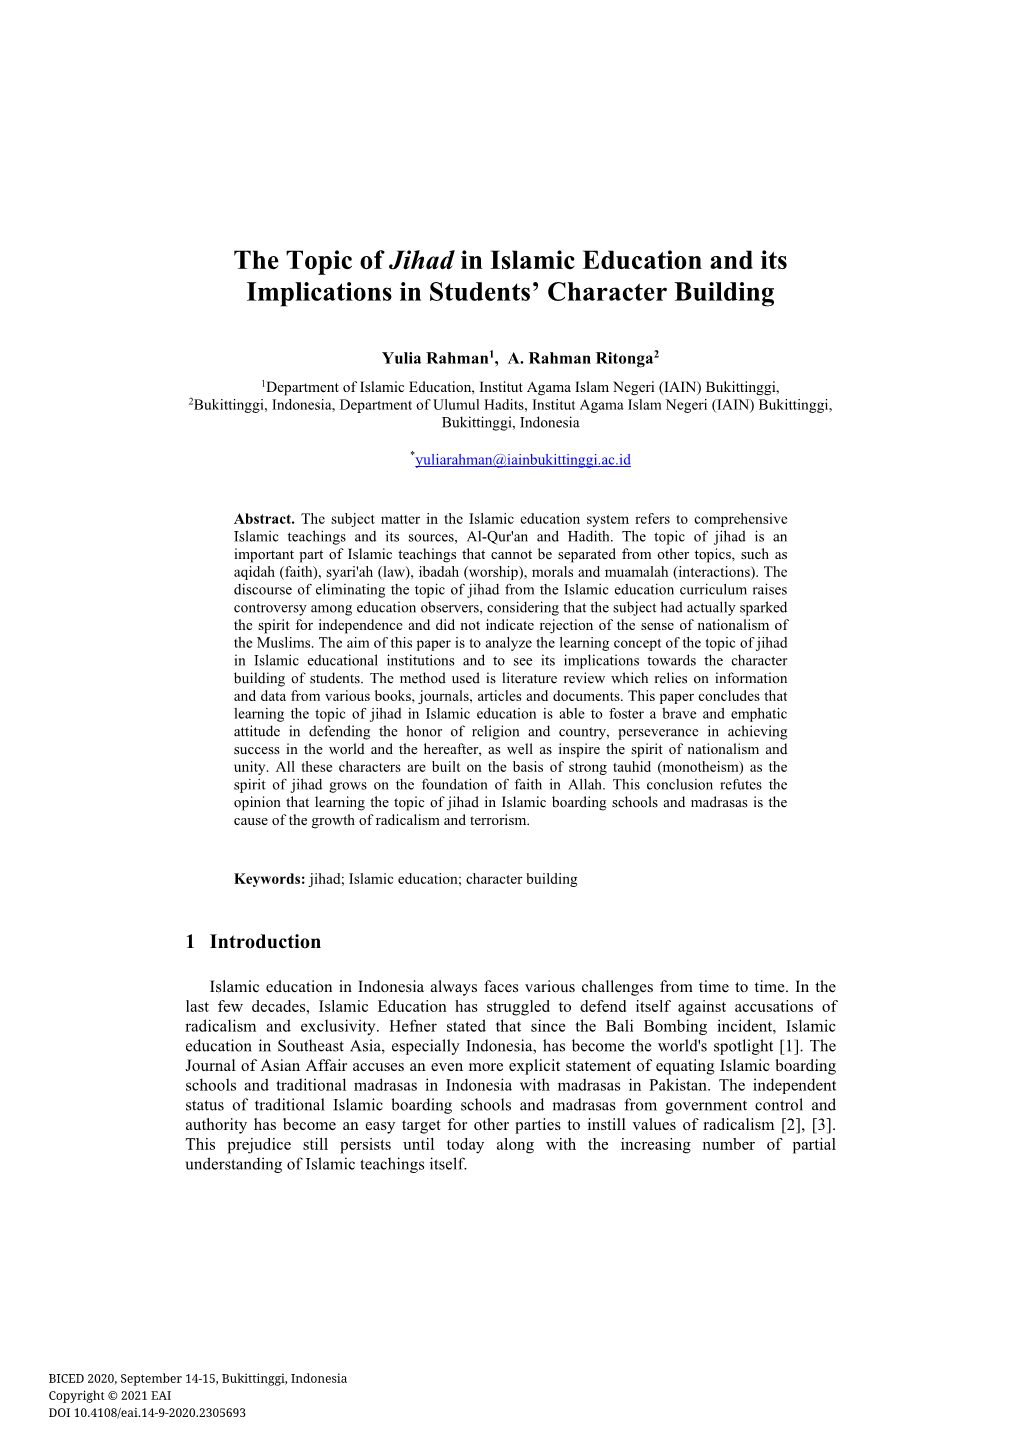 The Topic of Jihad in Islamic Education and Its Implications in Students' Character Building